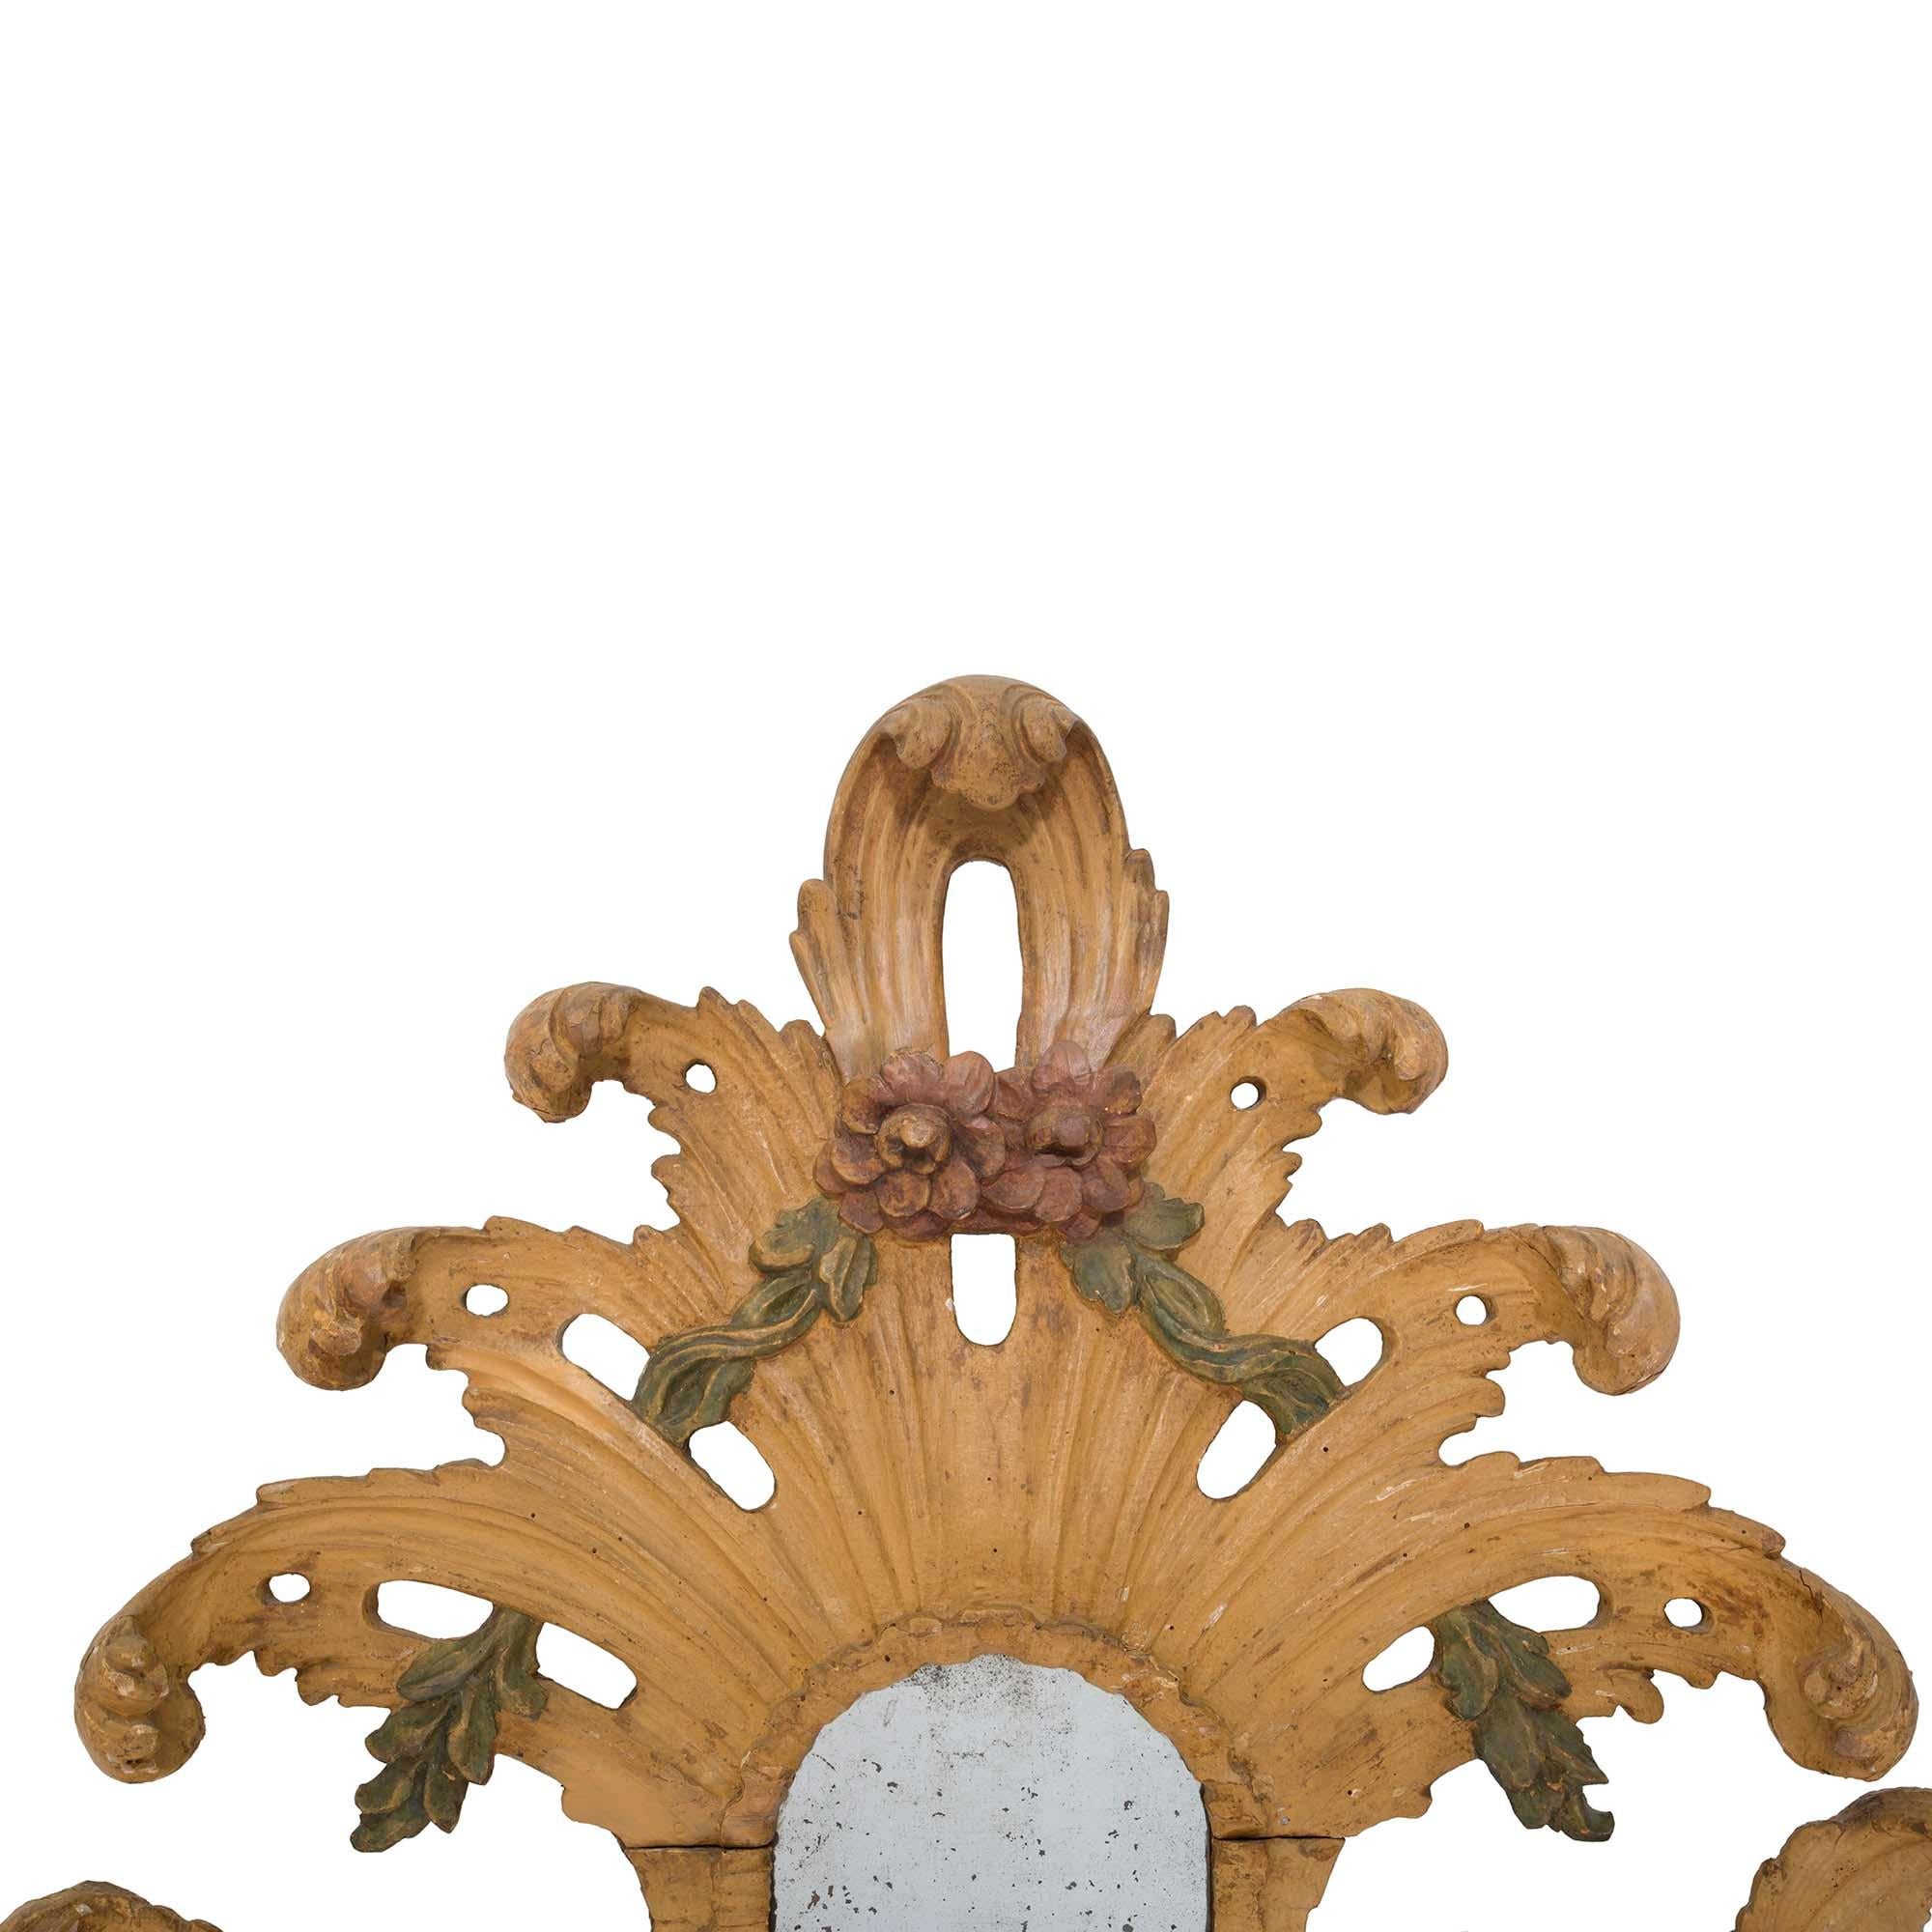 A beautiful and most unique Italian 18th century Baroque period polychrome mirror. The original mirror plates are framed within most decorative and richly carved polychrome borders with mottled designs and fine scrolled filiate movements. Extending